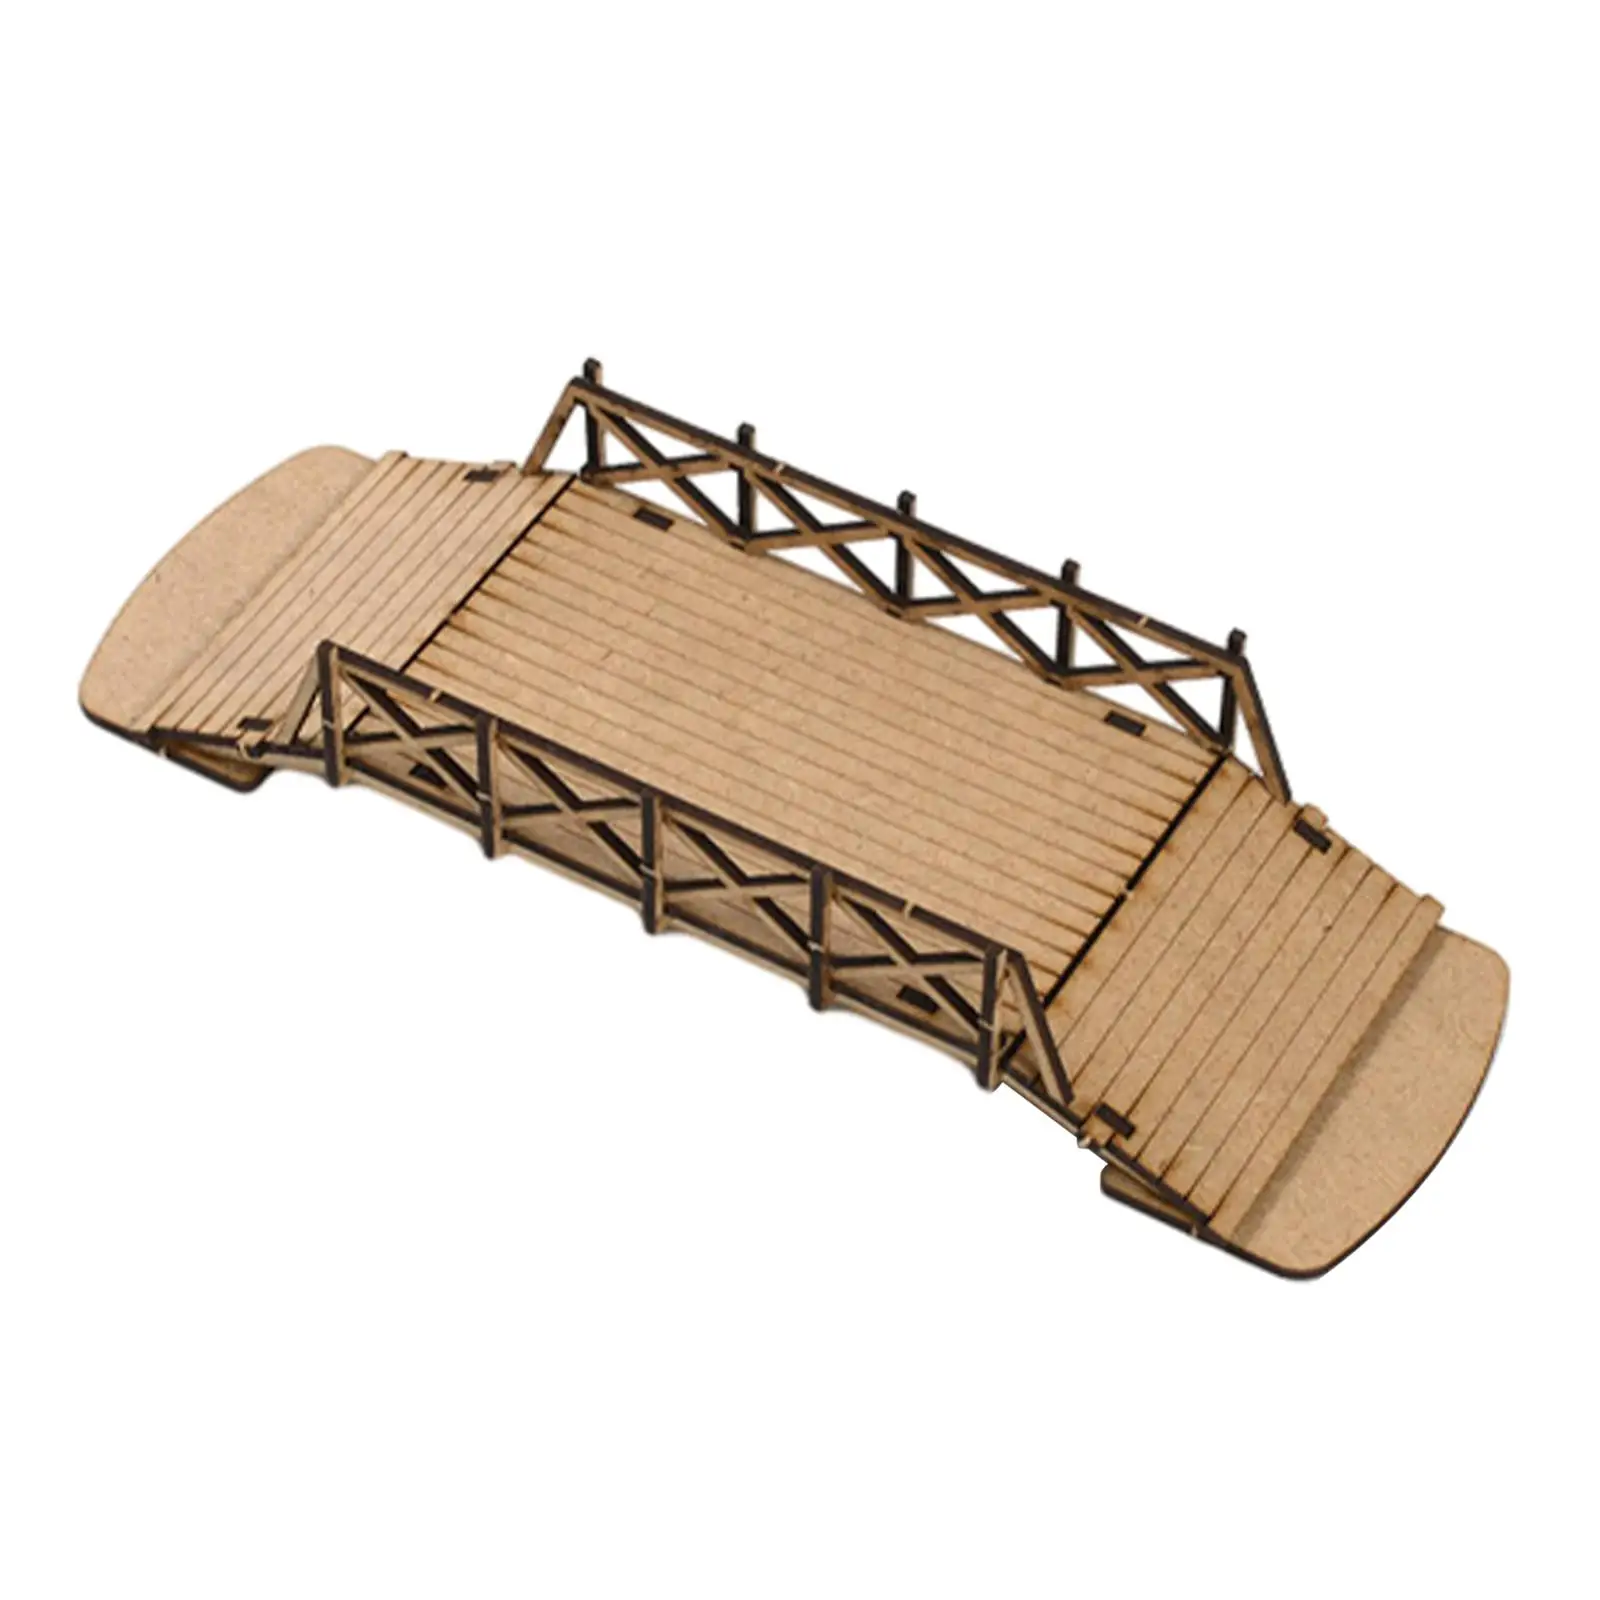 1/72 Scale Wooden Bridge Model Handmade Gift Collection Wood Construction for Boys Girls Children Kids Adults Party Favors